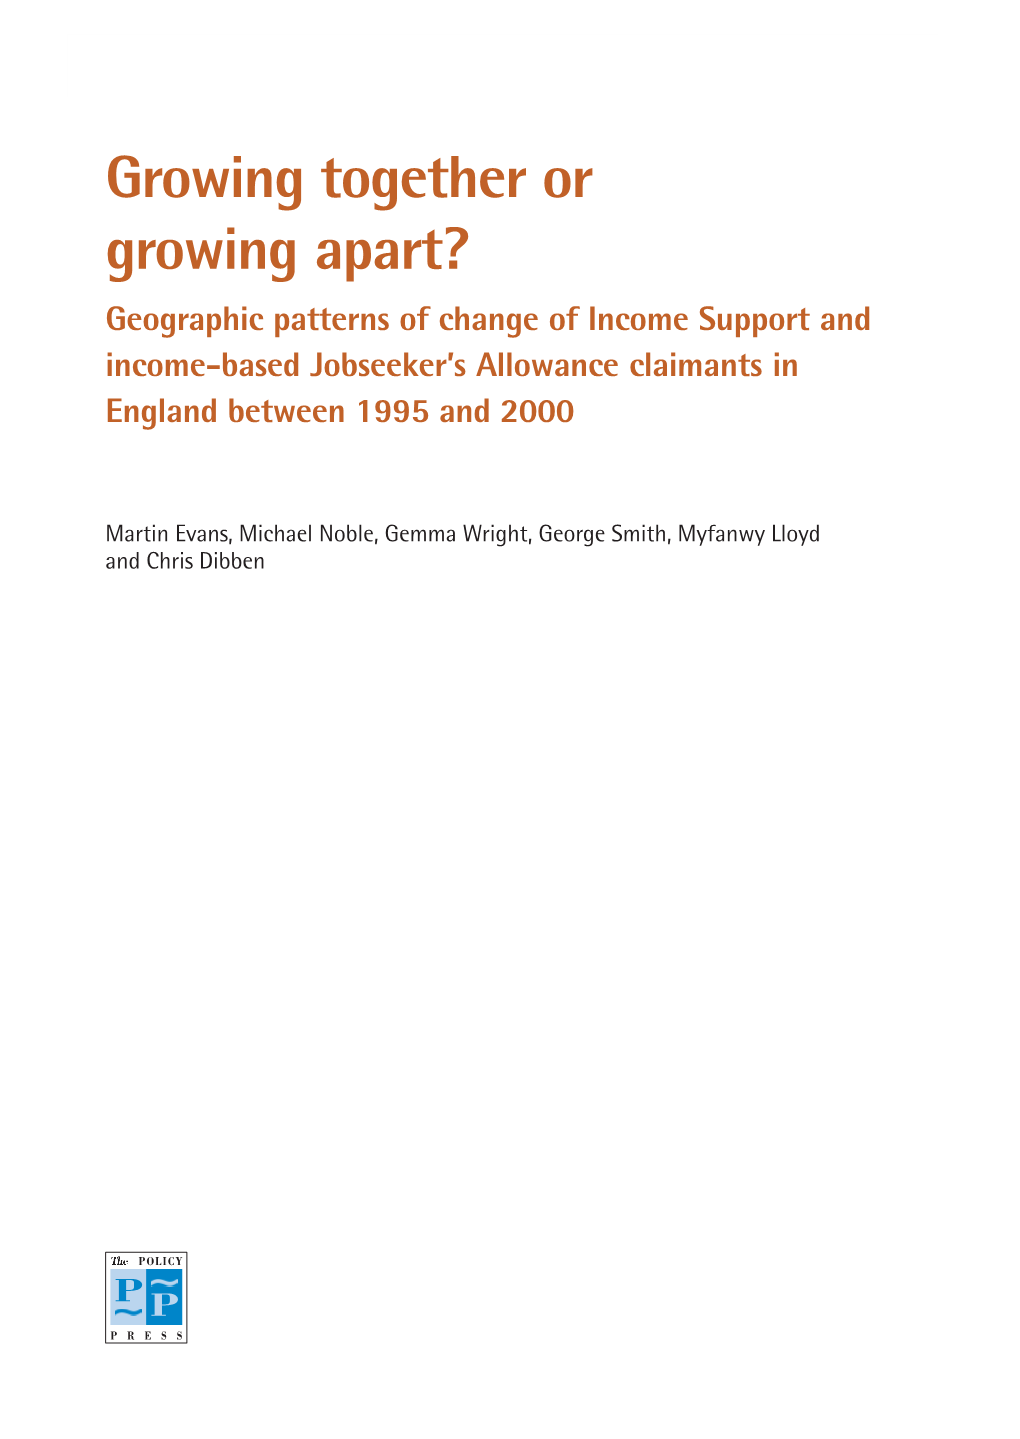 Growing Together Or Growing Apart? Geographic Patterns of Change of Income Support and Income-Based Jobseeker’S Allowance Claimants in England Between 1995 and 2000